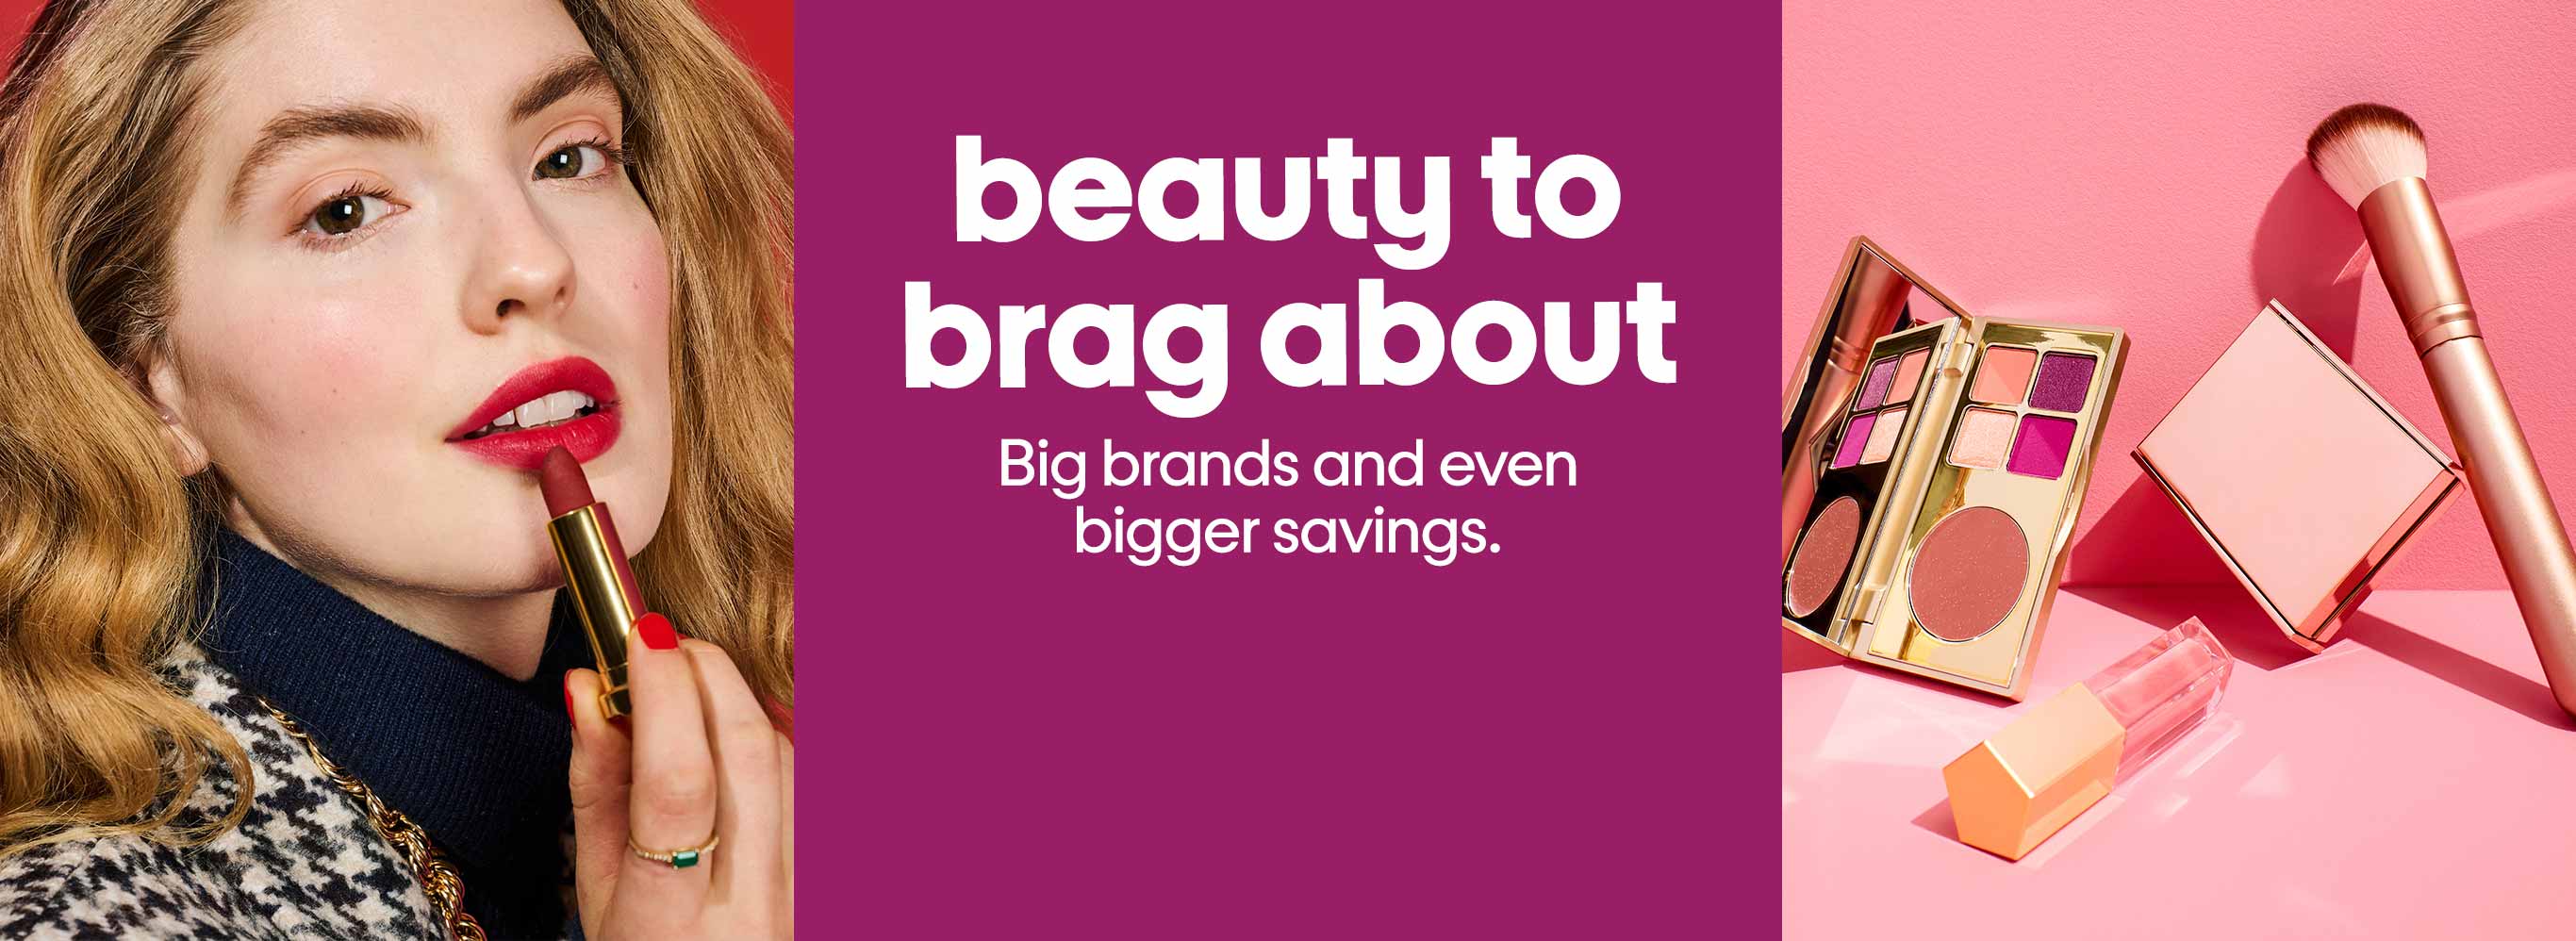 Beauty to brag about | Big brands and even bigger savings